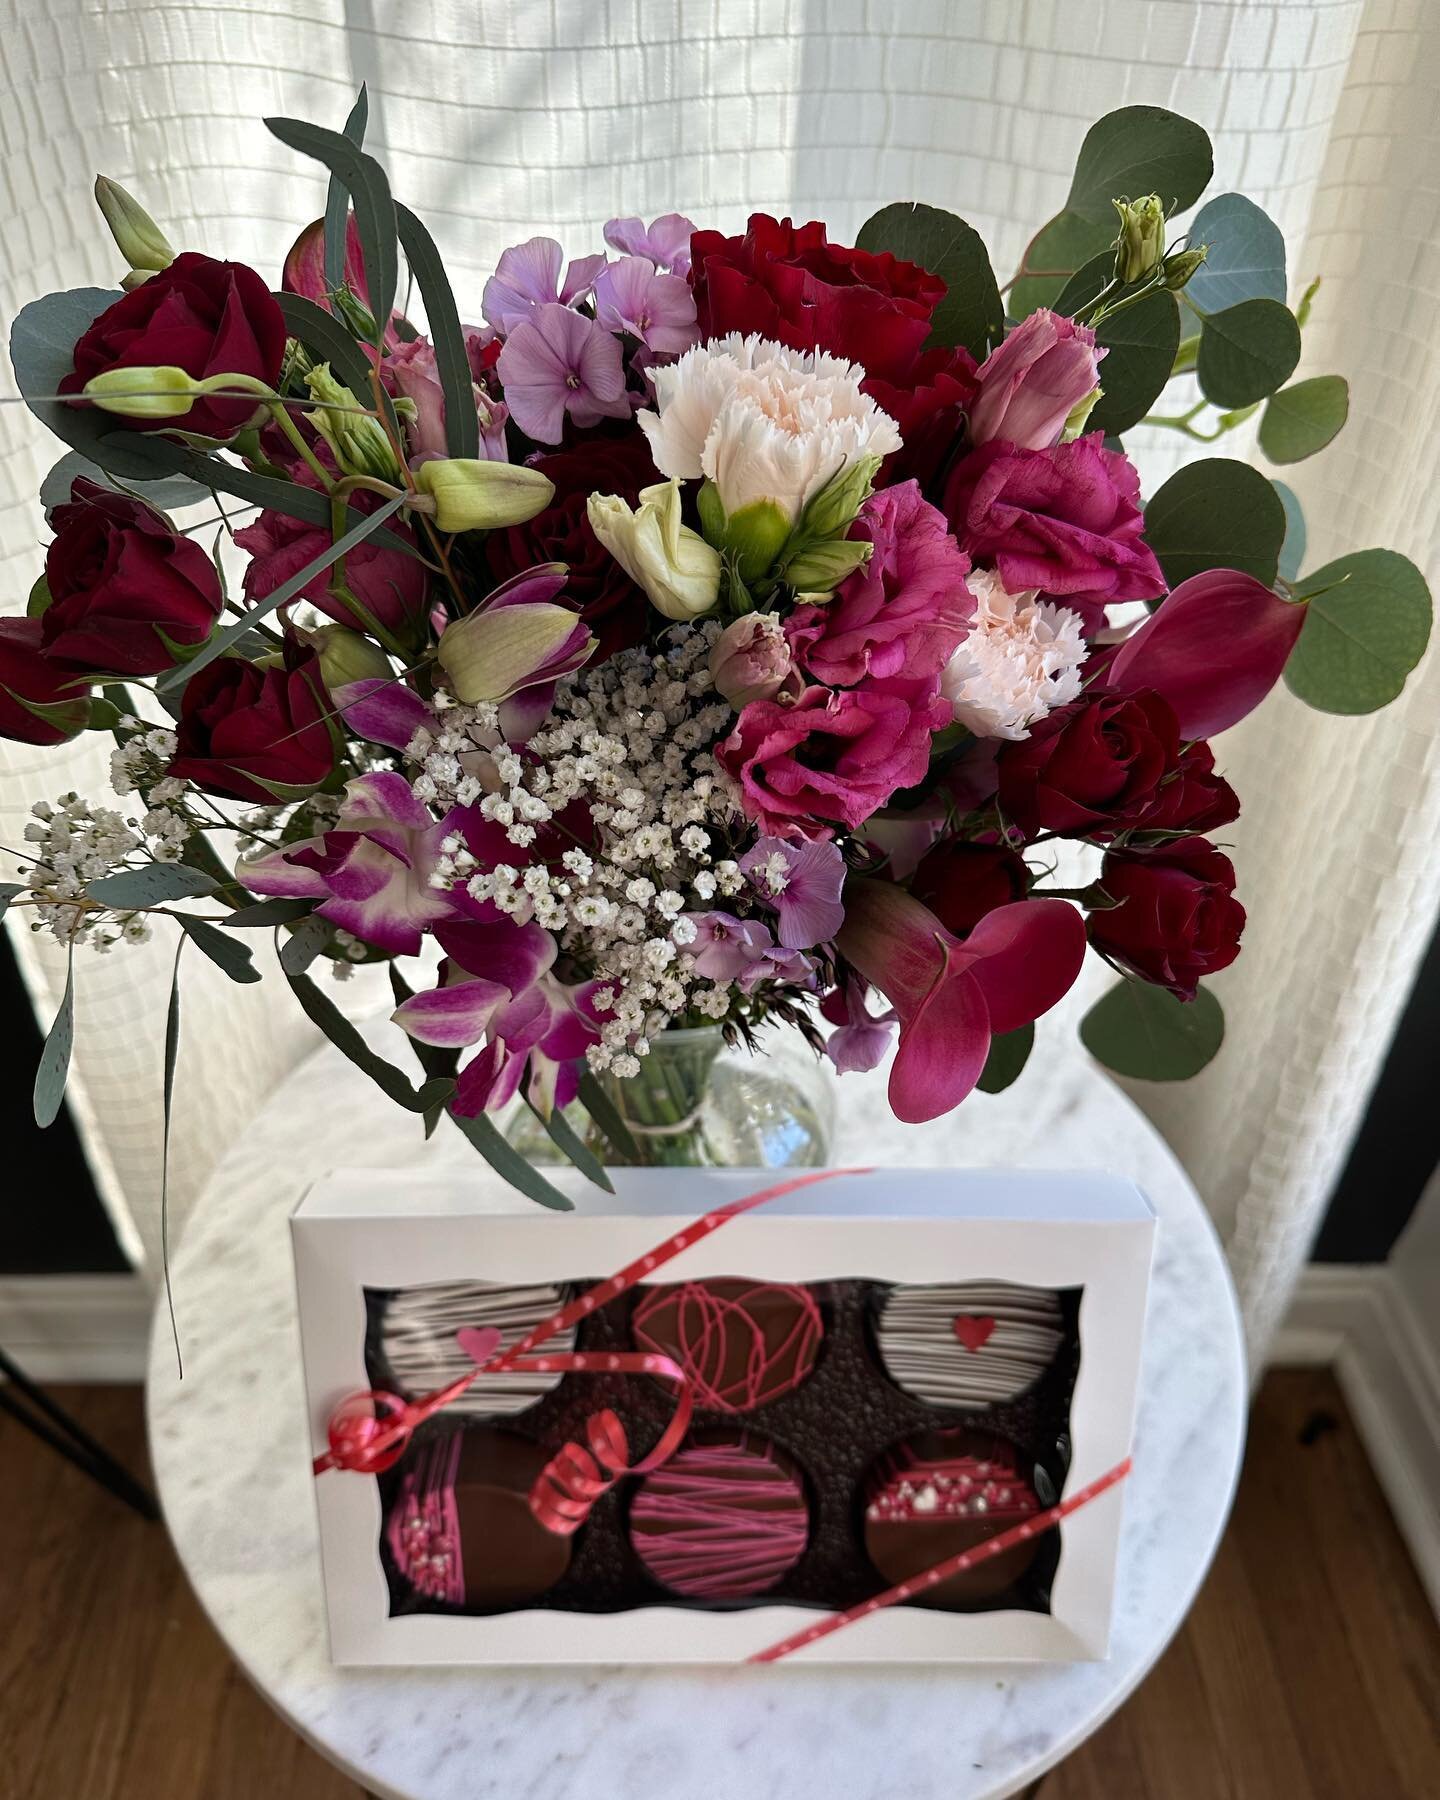 Valentine&rsquo;s Day single lady GIVEAWAY! Tag your friend in this post, winner will be announced tomorrow Monday 2/13 at 8pm!!! 
One lucky gal will win this lovely Valentine&rsquo;s Day Package! Includes a large designer bouquet, a box of chololate